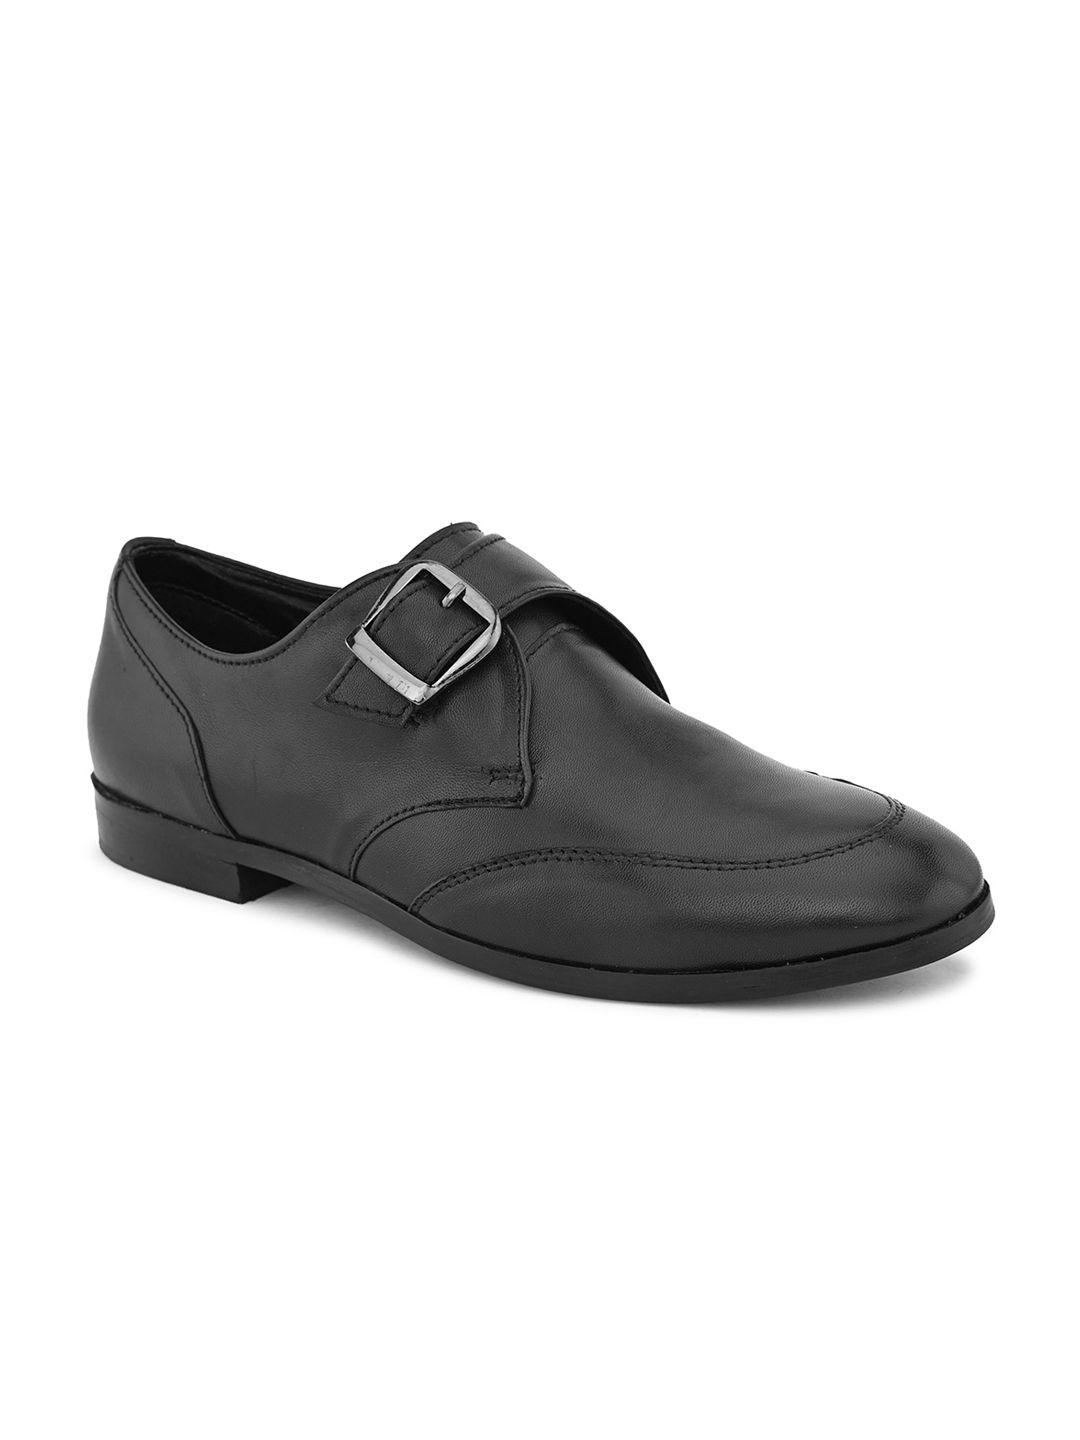 carlo romano women rodia leather formal monk shoes with buckle detail